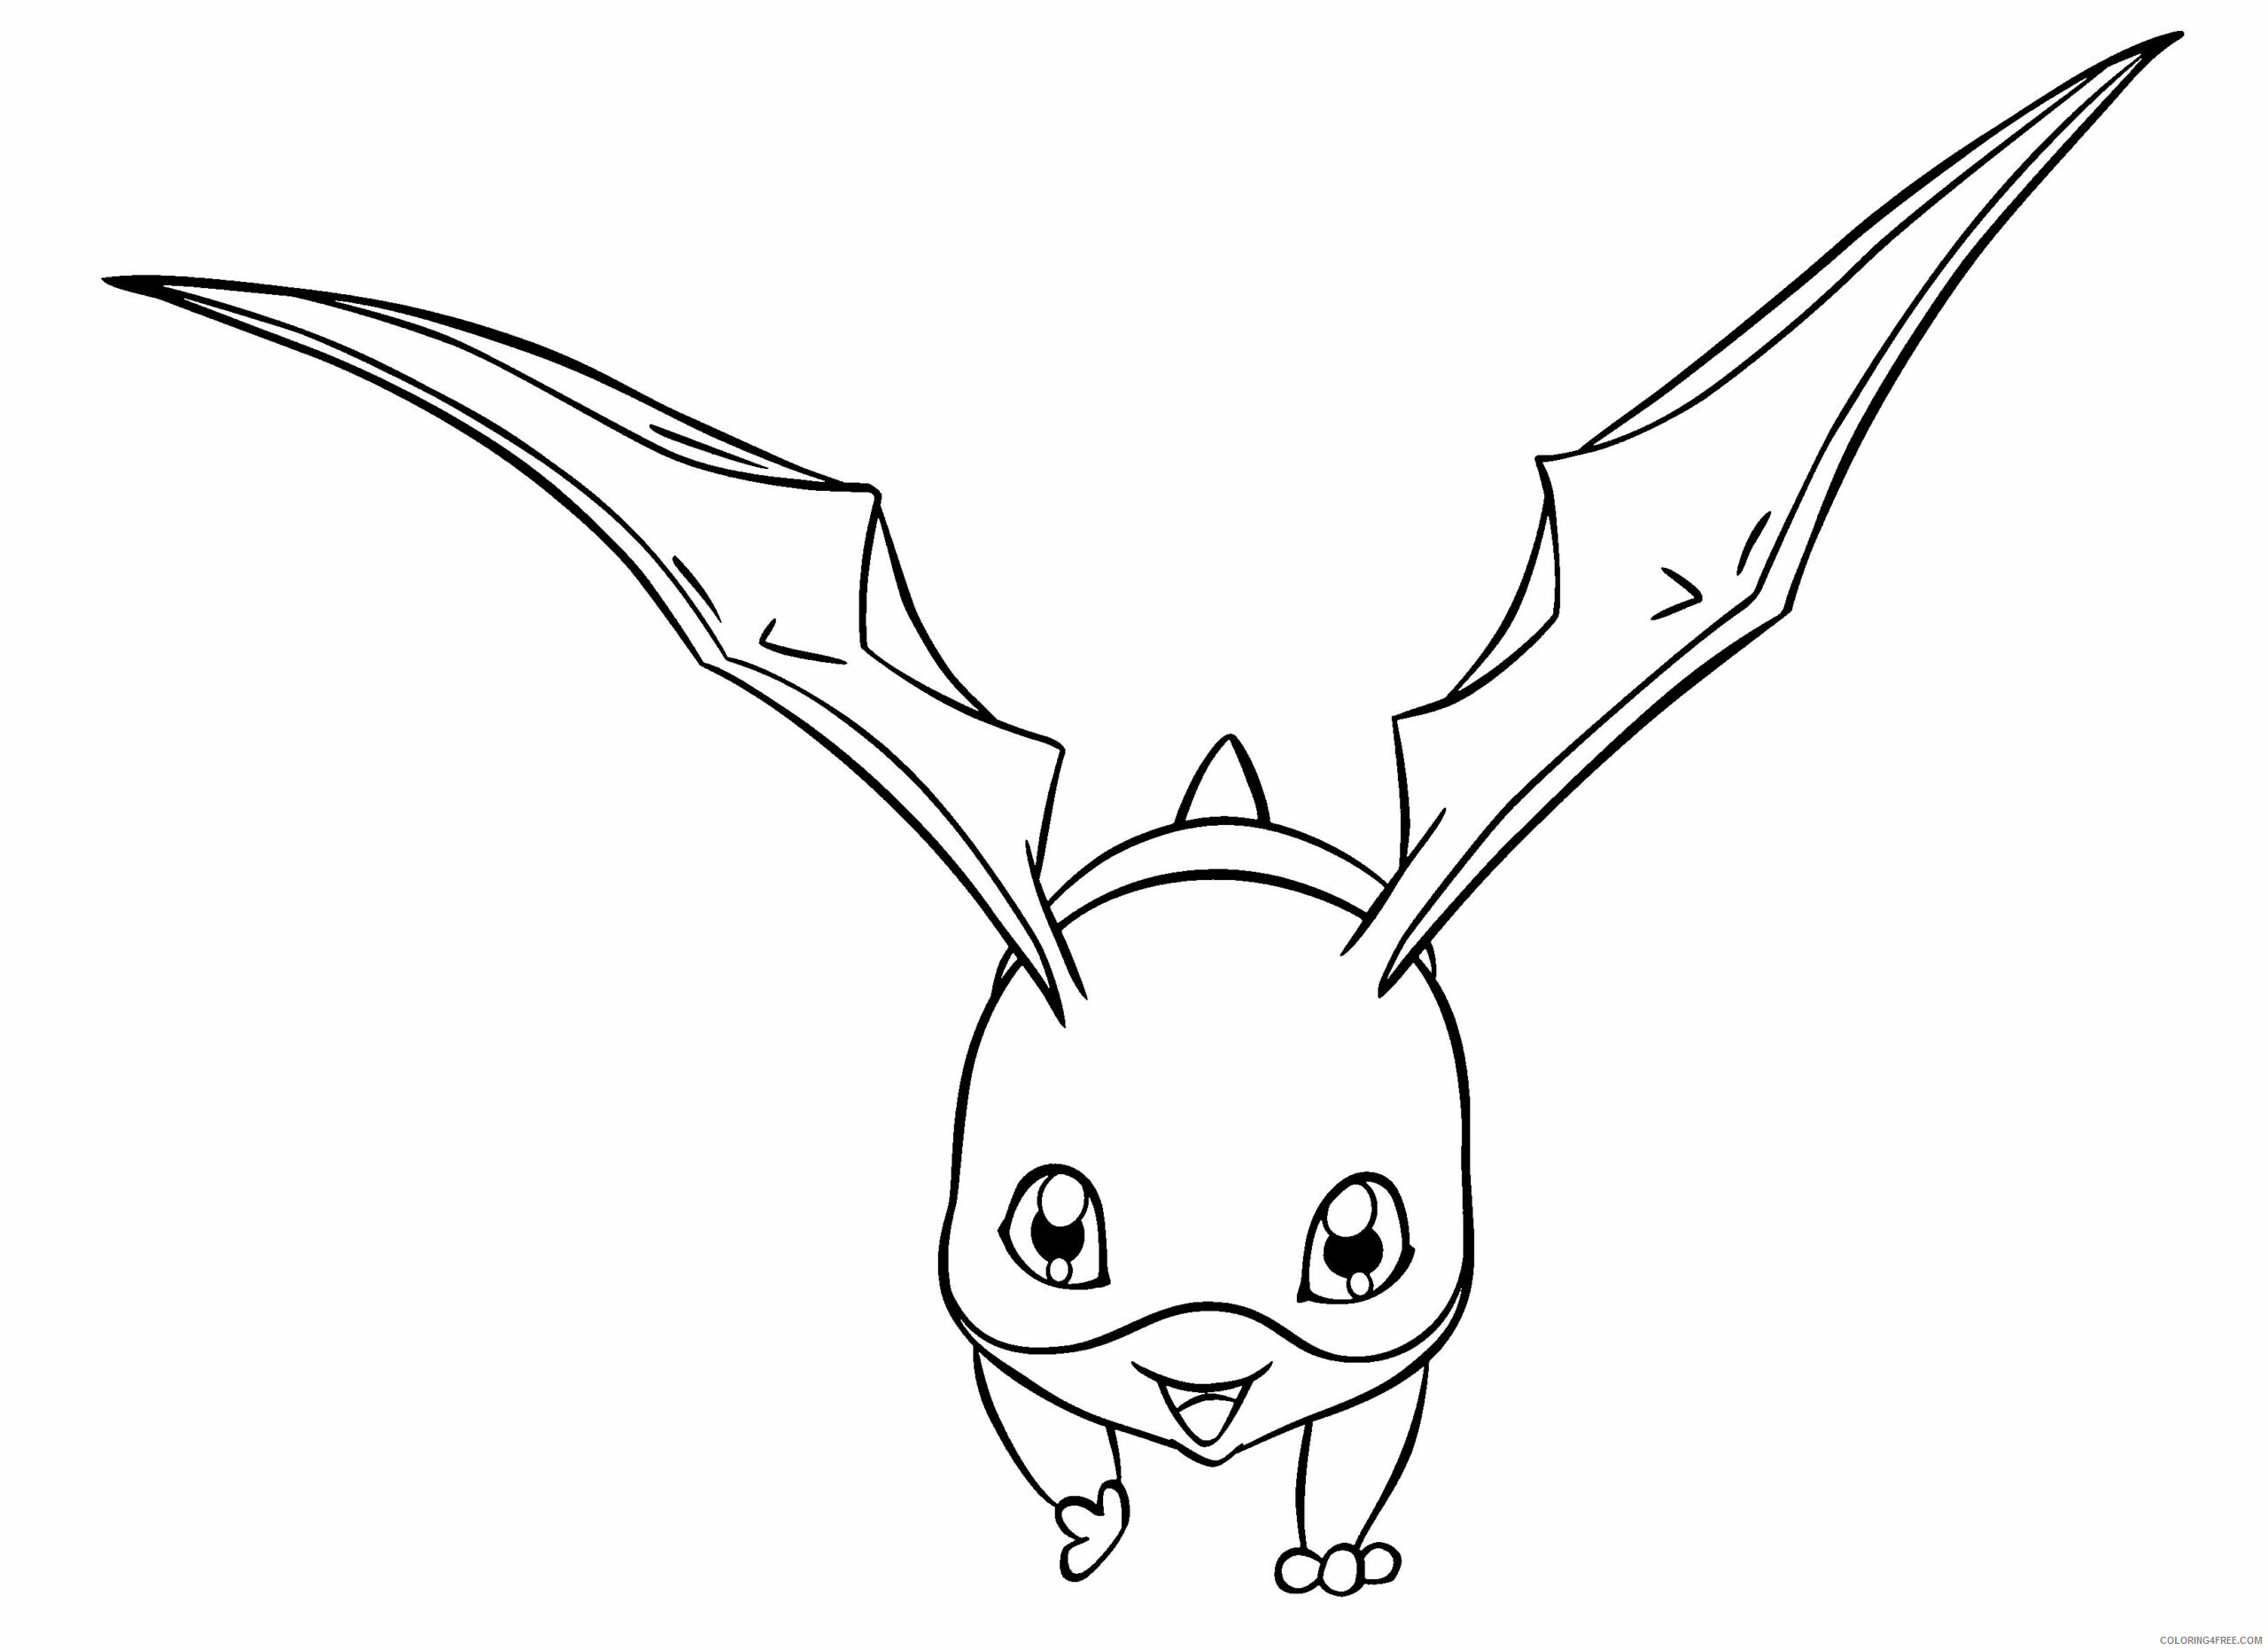 Digimon Printable Coloring Pages Anime digimon sRCFe 2021 0188 Coloring4free